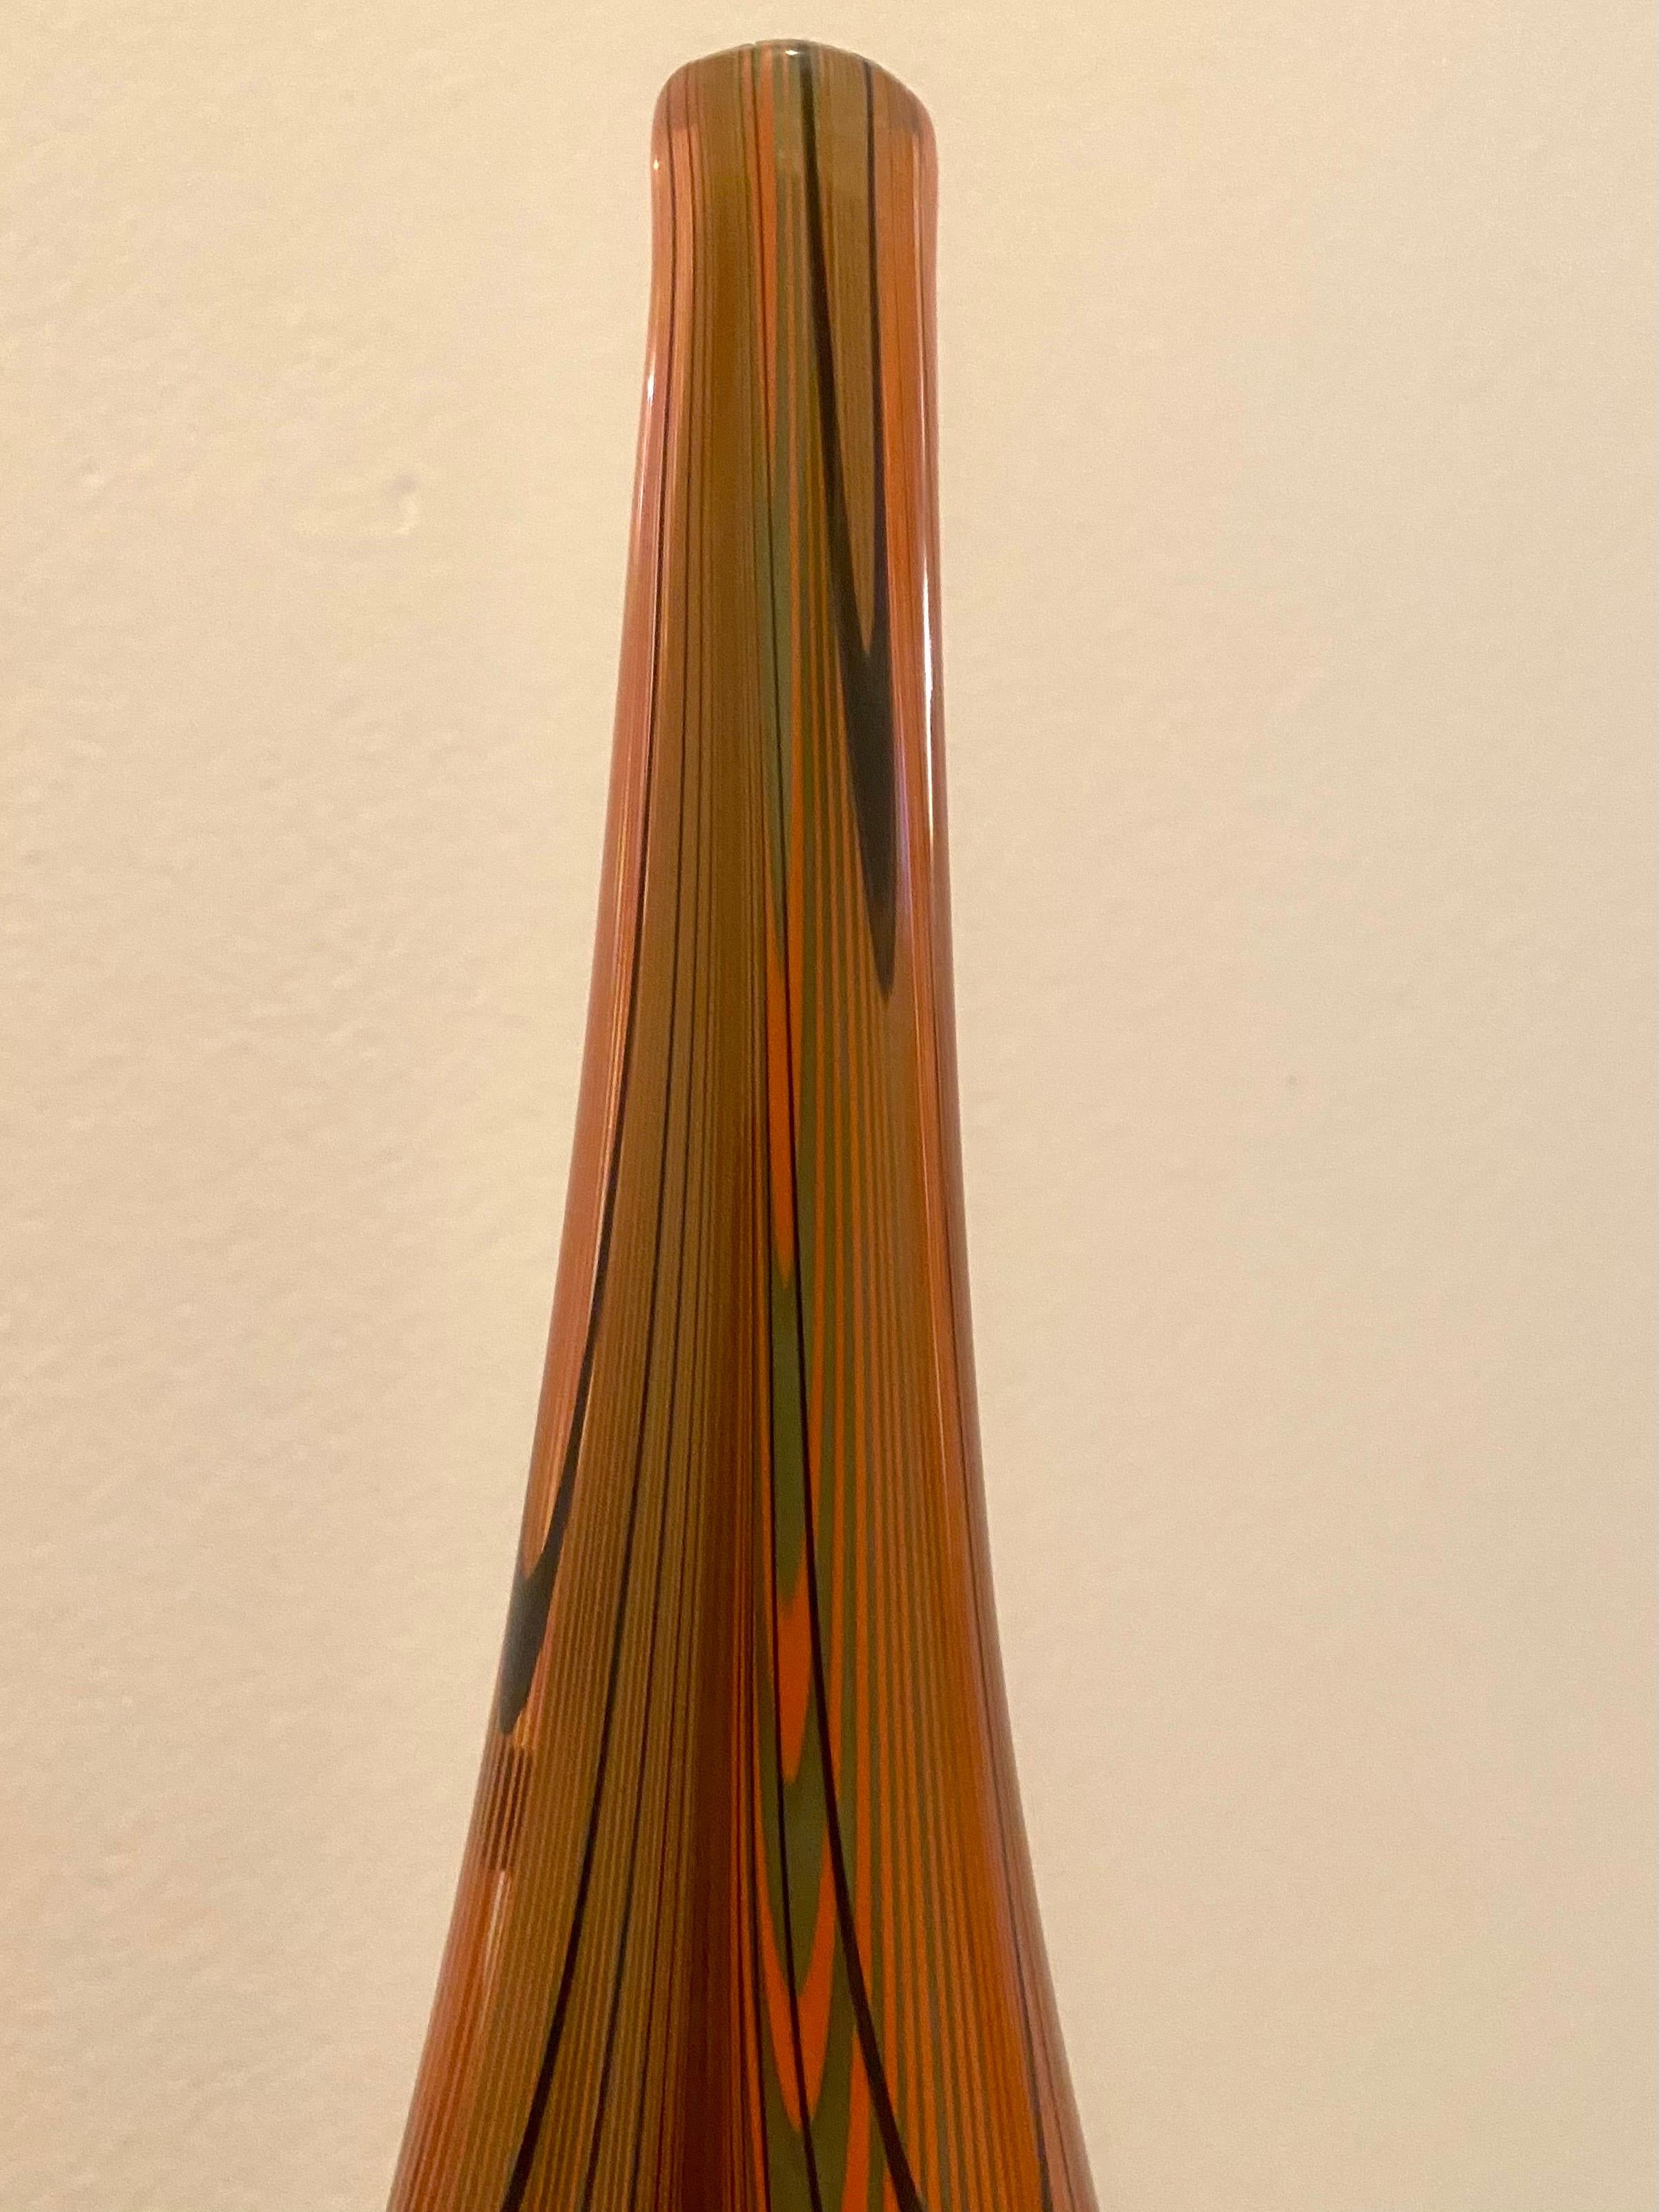 Alberto Dona Tall Feather Murano Glass Vase, Signed For Sale 2